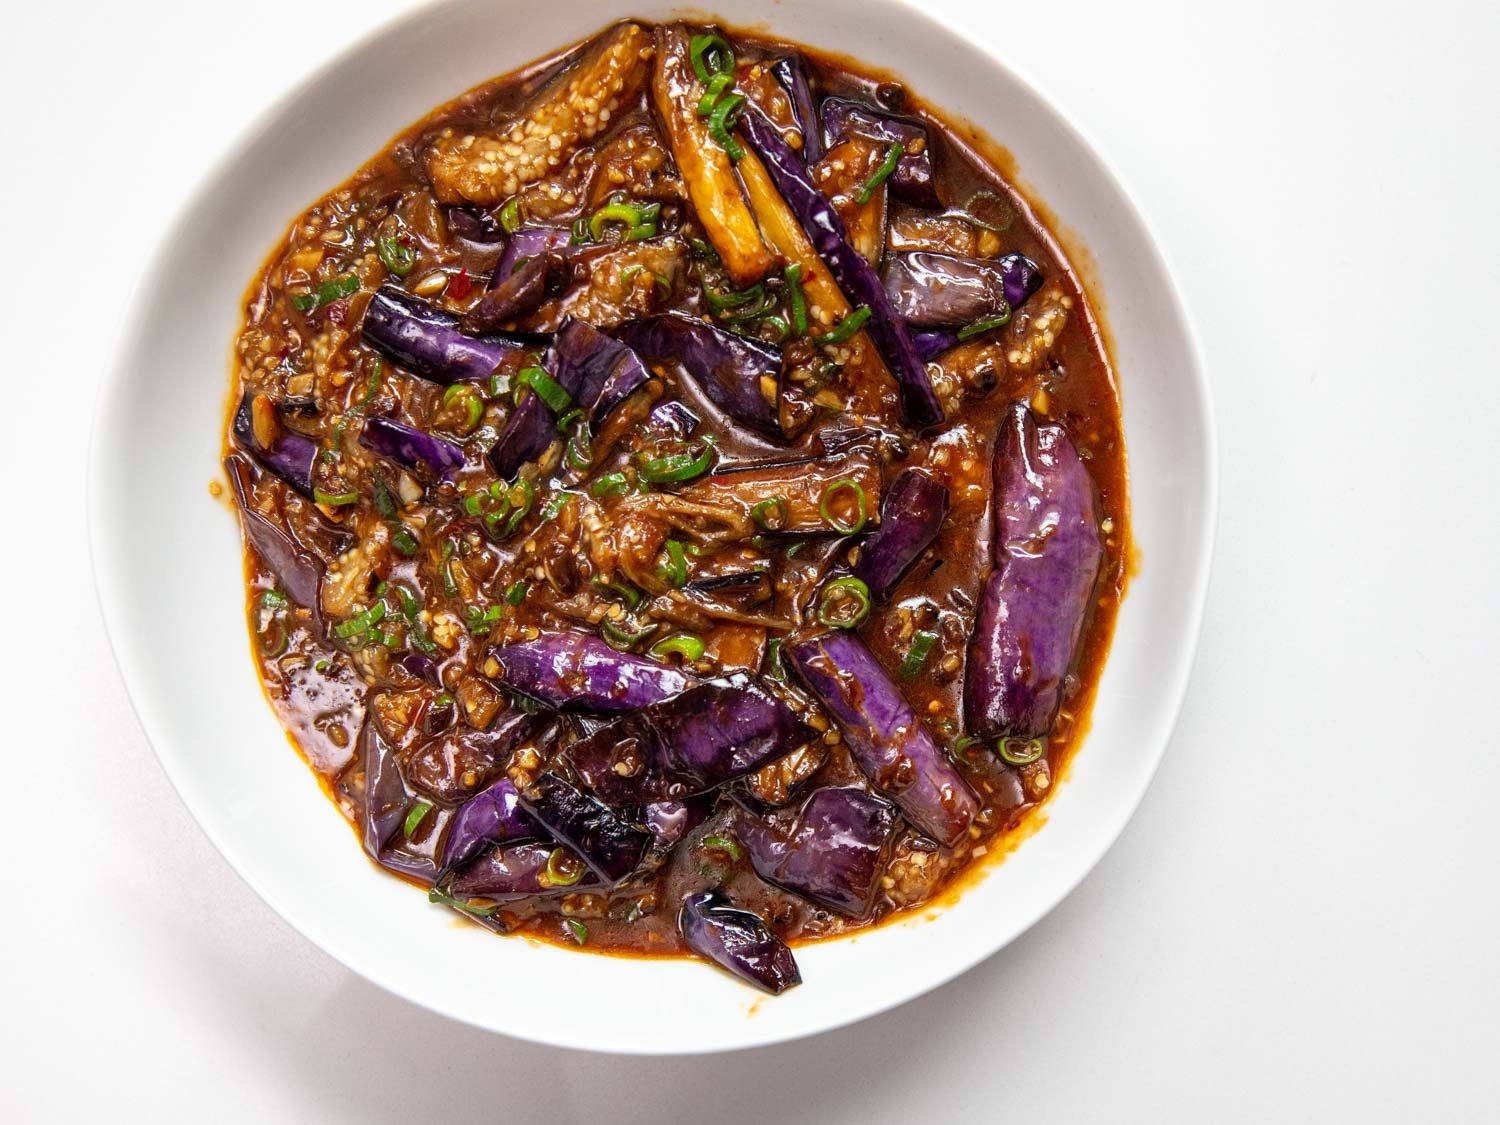 Fish-Fragrant Eggplants (Sichuan Braised Eggplant With Garlic, Ginger, and Chilies)